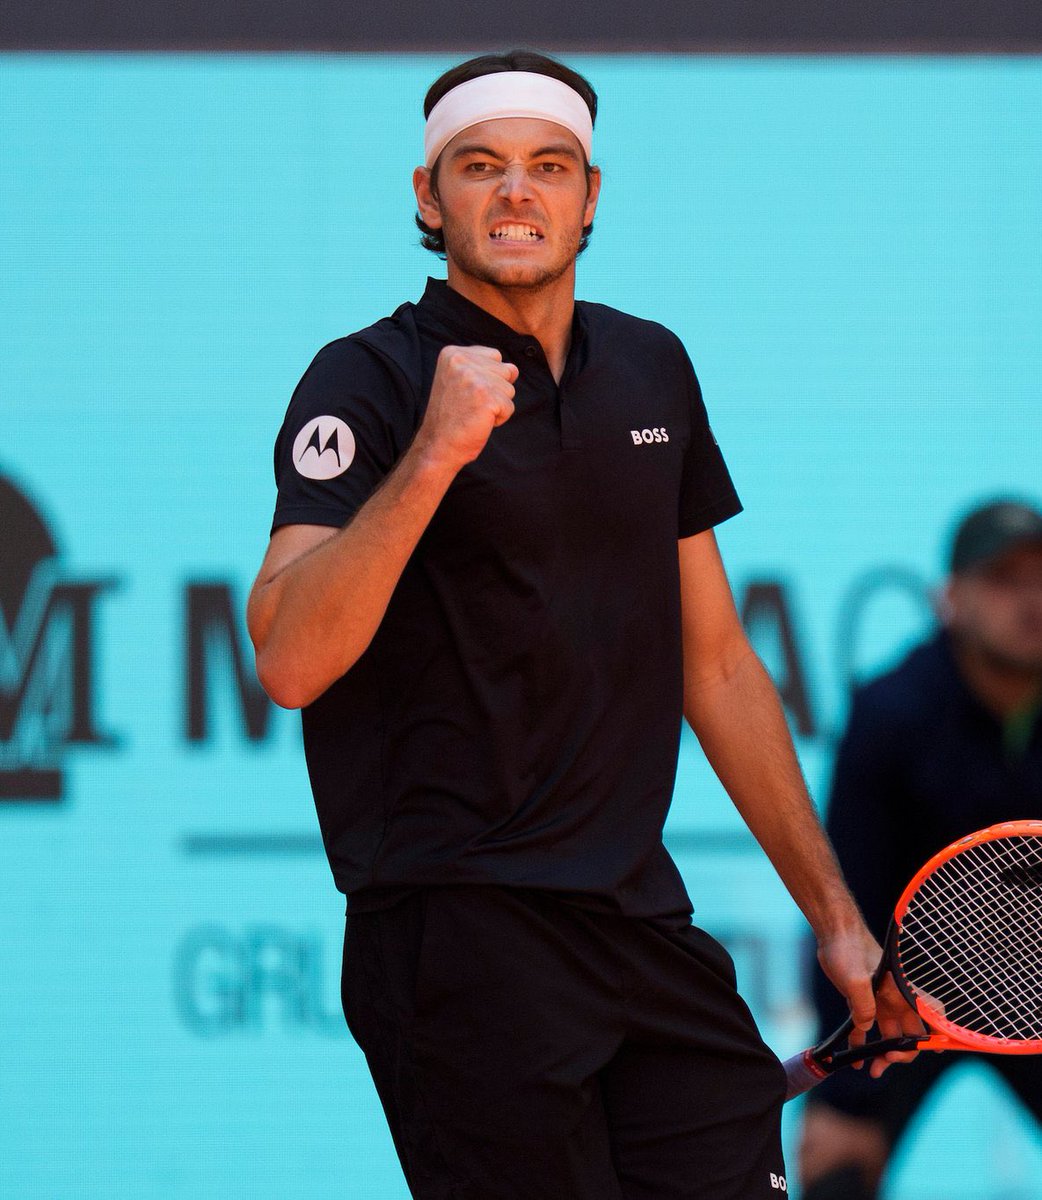 Fritz beats Cerundolo 6-1 3-6 6-3 Taylor becomes the 1st American man since 2005 to reach the Madrid semifinals. 18 years & 11 months. ✅250th career match win ✅1st Madrid SF ✅4th Masters SF The drought is over. 🇺🇸